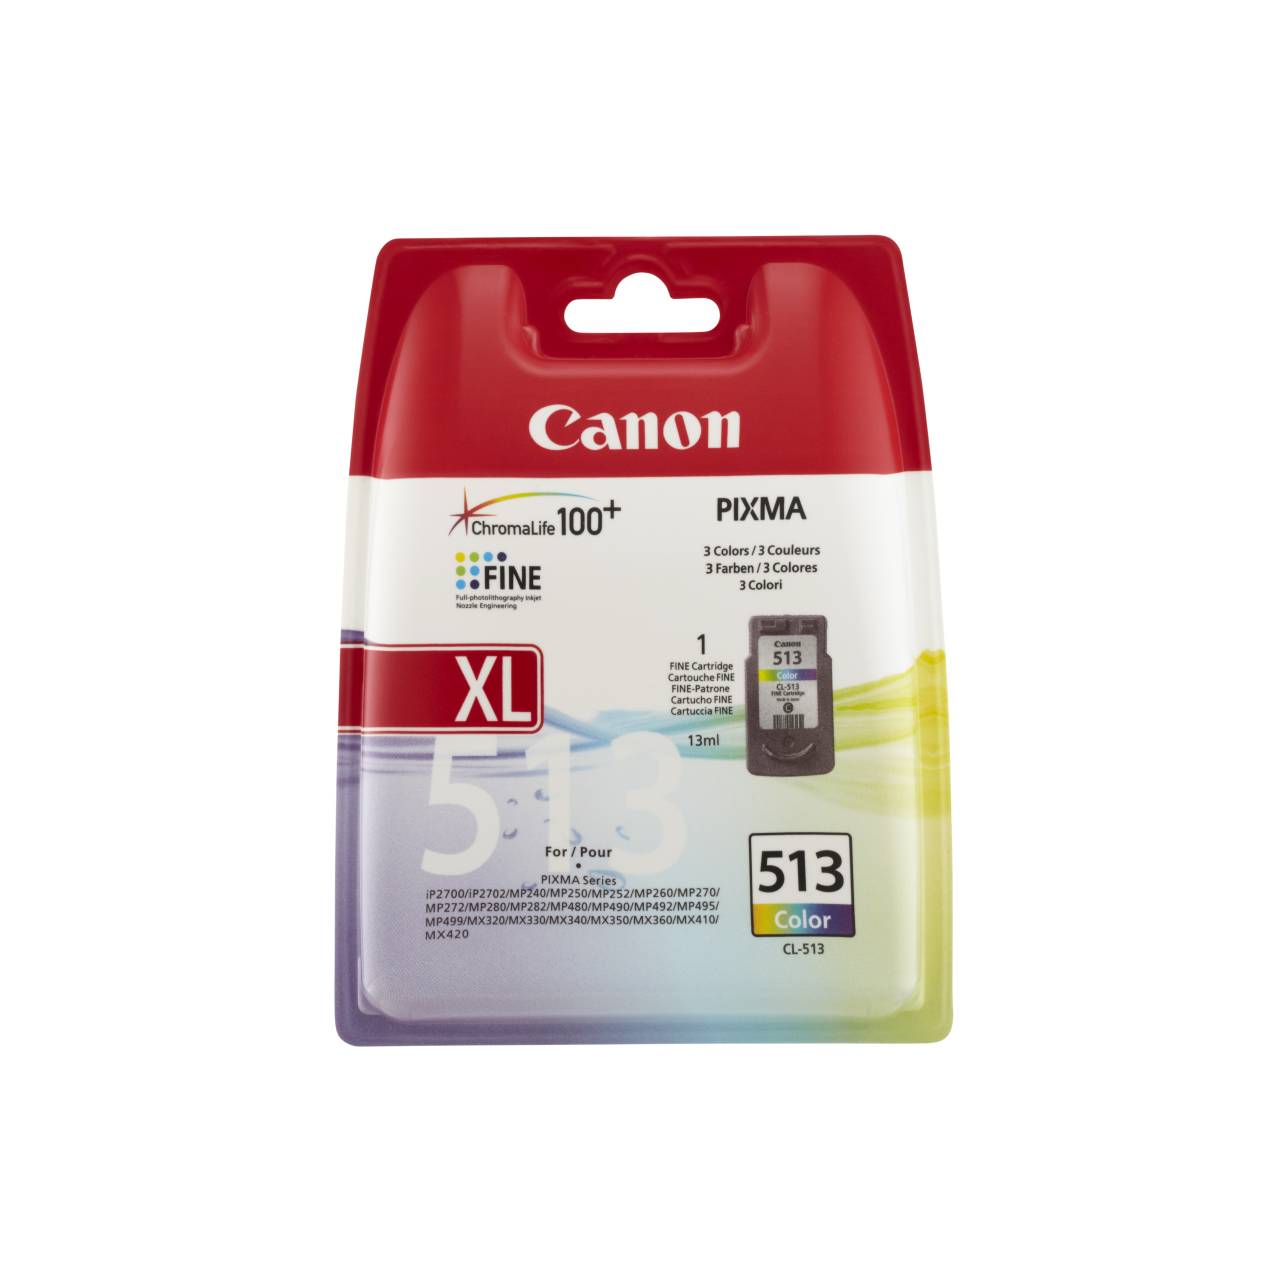 Canon CL 513 High Capacity Colour Ink Cartridge ( 513 Color )